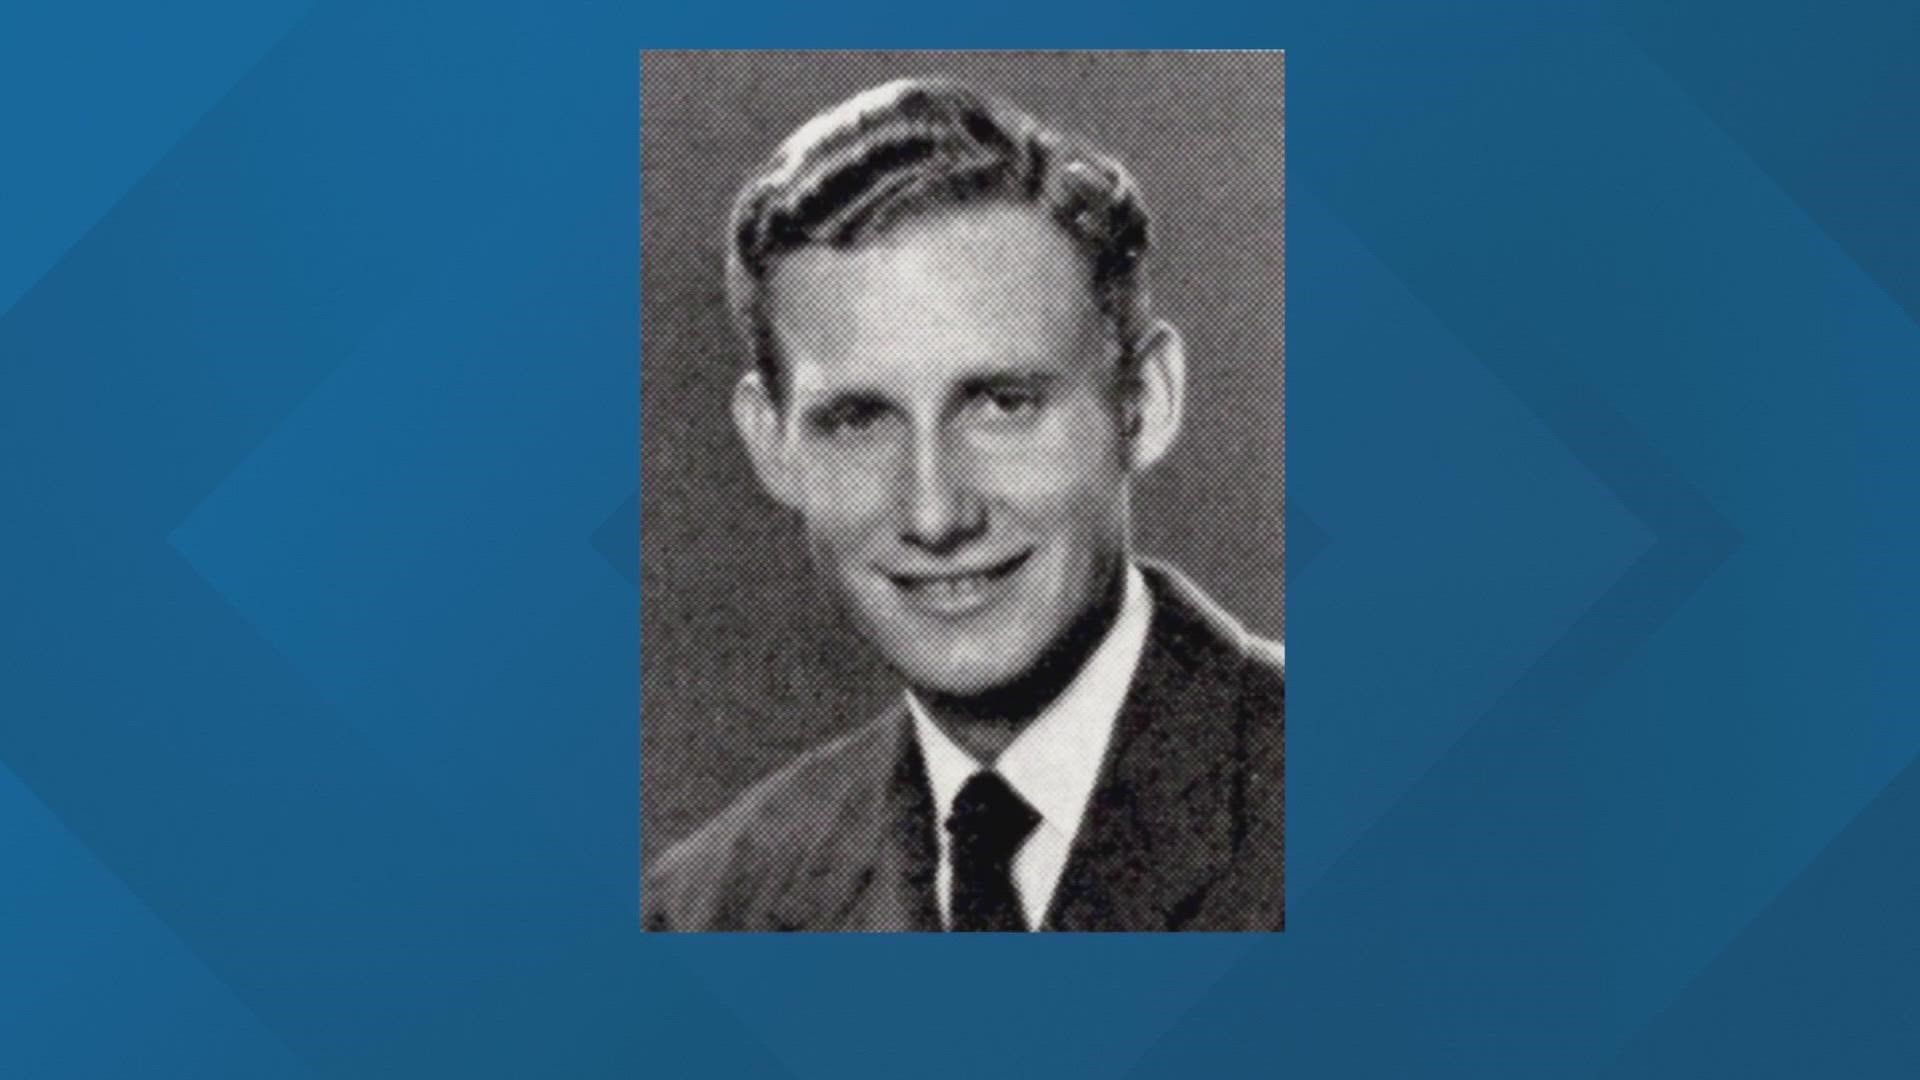 Authorities have positively identified the remains of an Army Air Forces pilot from Ohio who died when his plane was shot down over Germany during World War II.